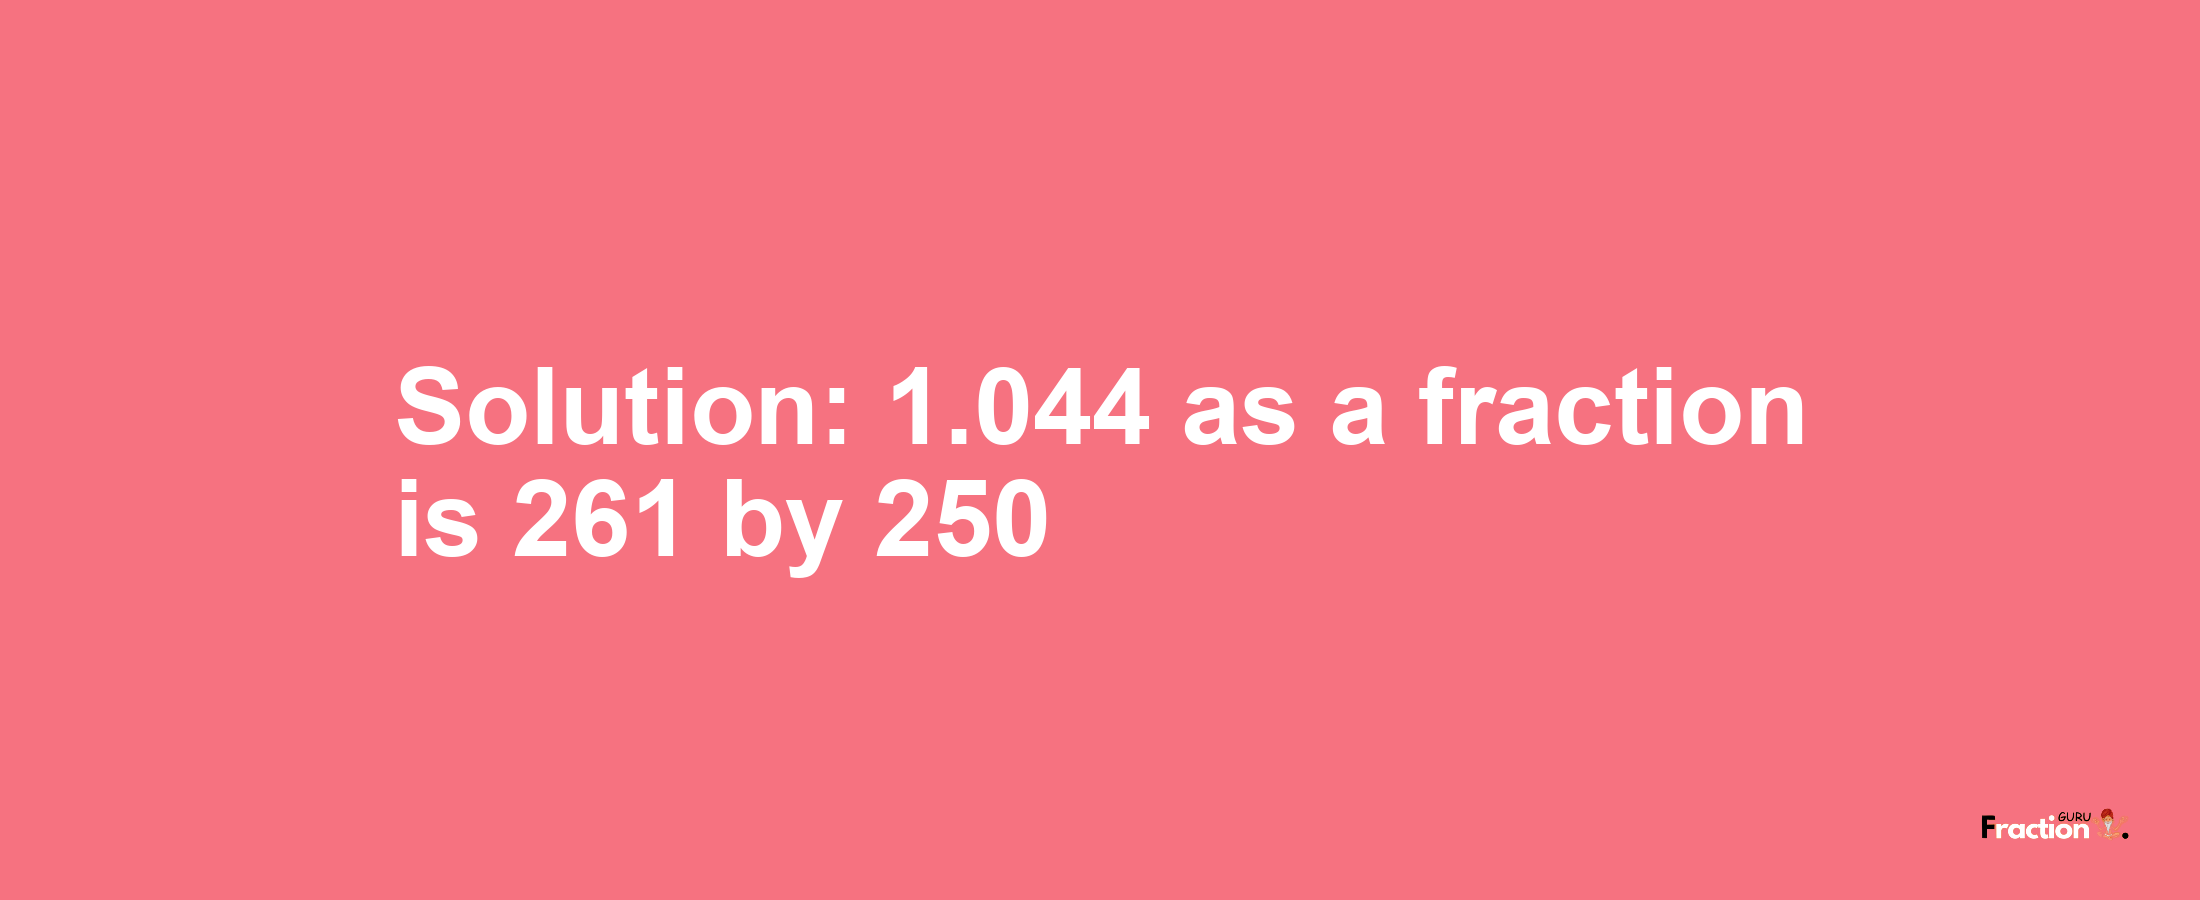 Solution:1.044 as a fraction is 261/250